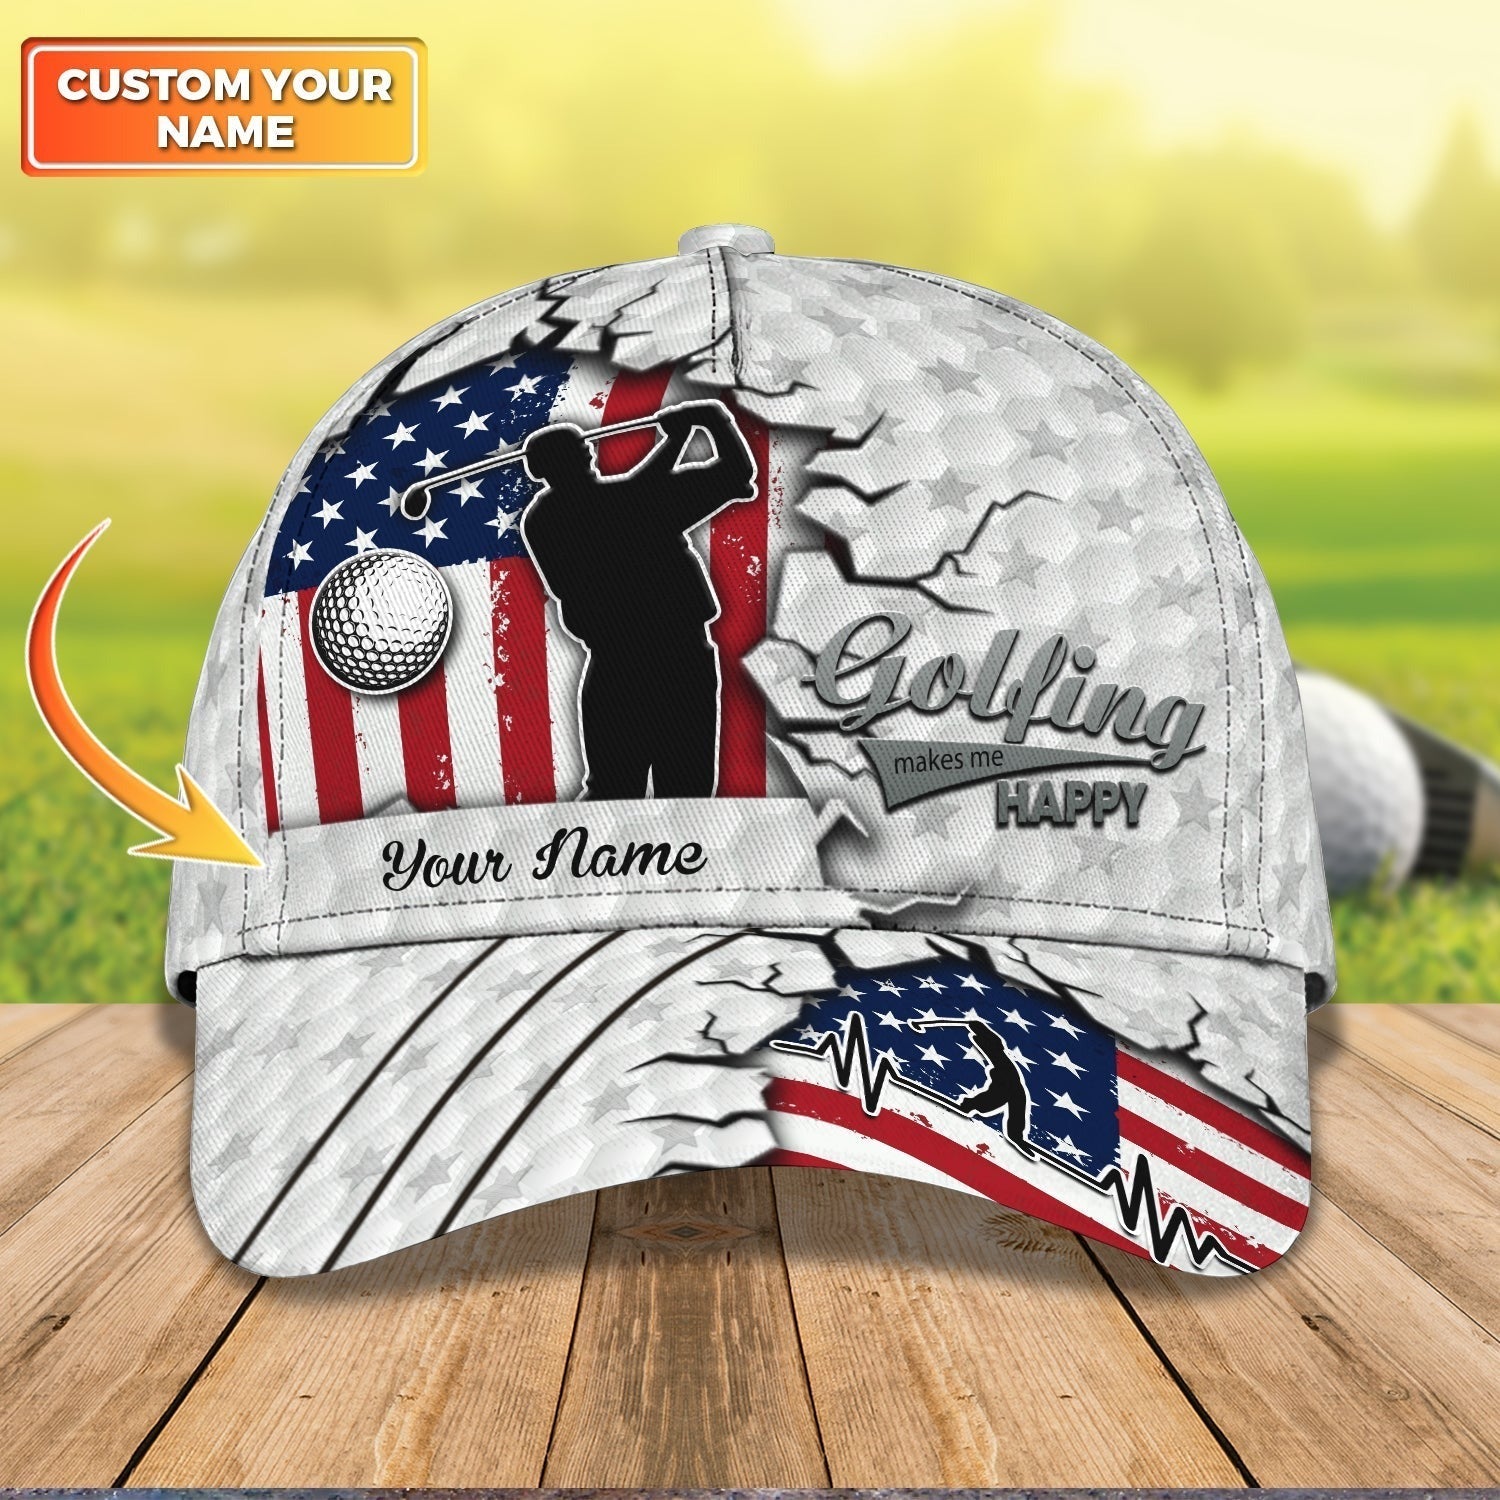 Personalized Golfing Baseball Cap Hat For Men And Woman, Golfing Make Me Happy, Golf Cap Hat